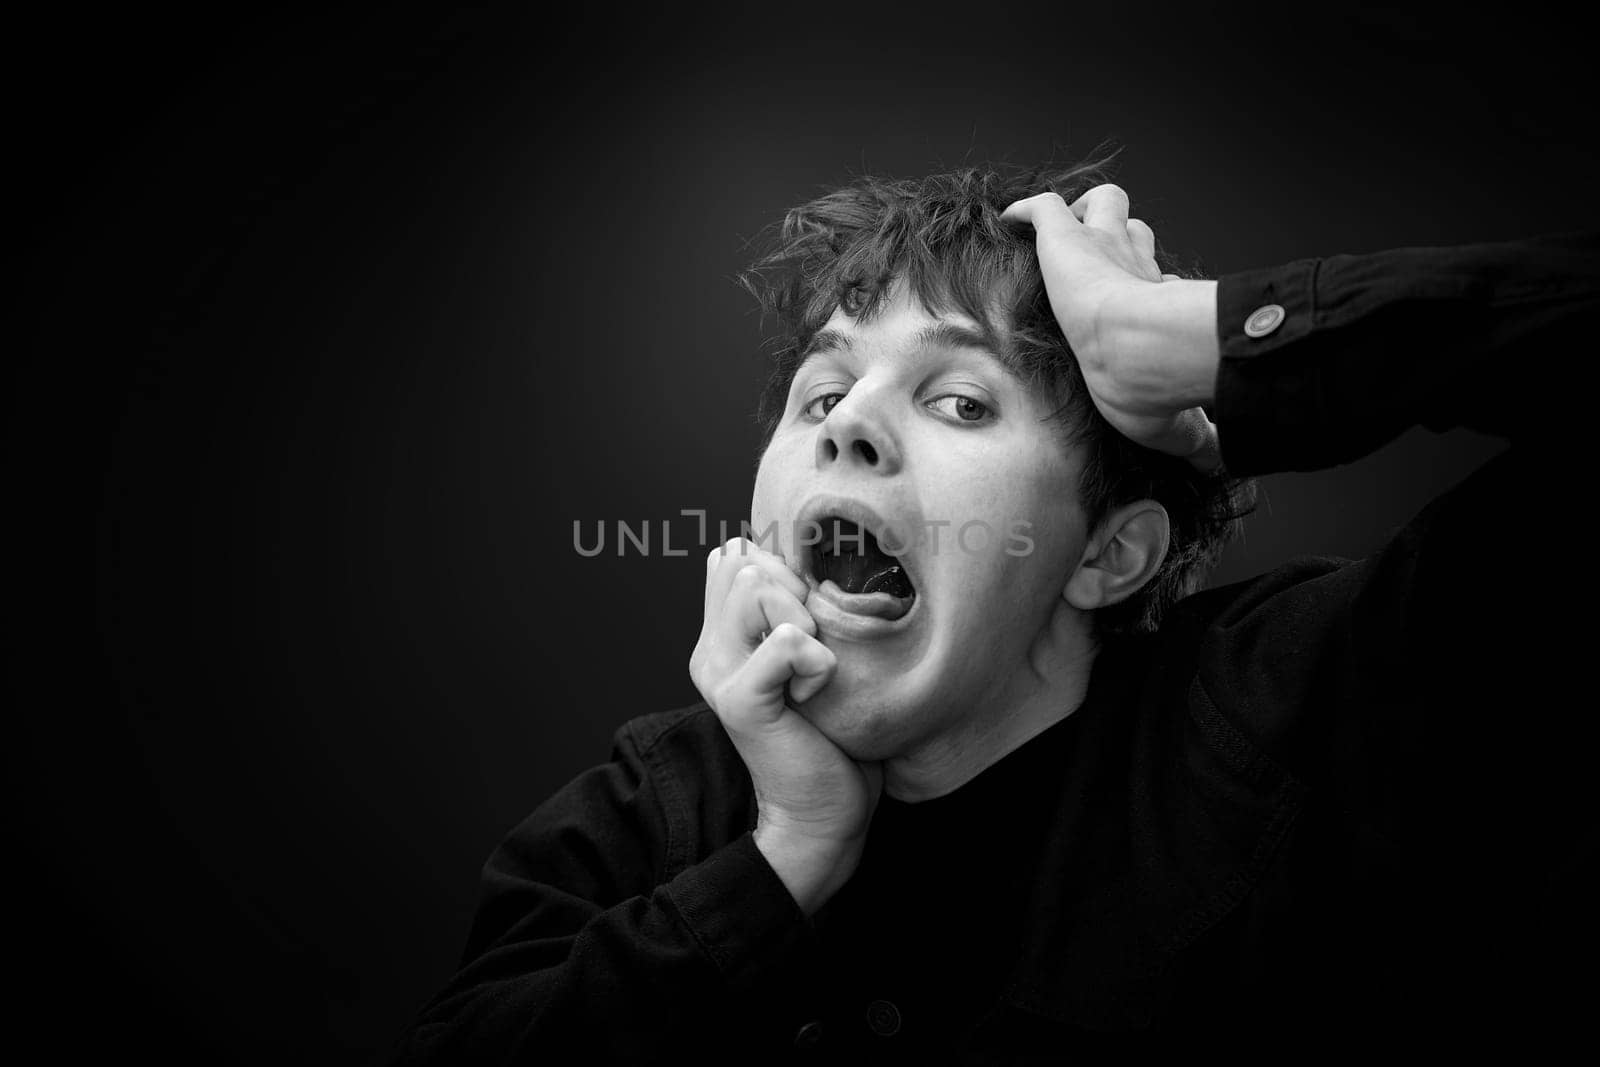 portrait of crazy young man yelling with a violent or desperate face and grimacing . black and white